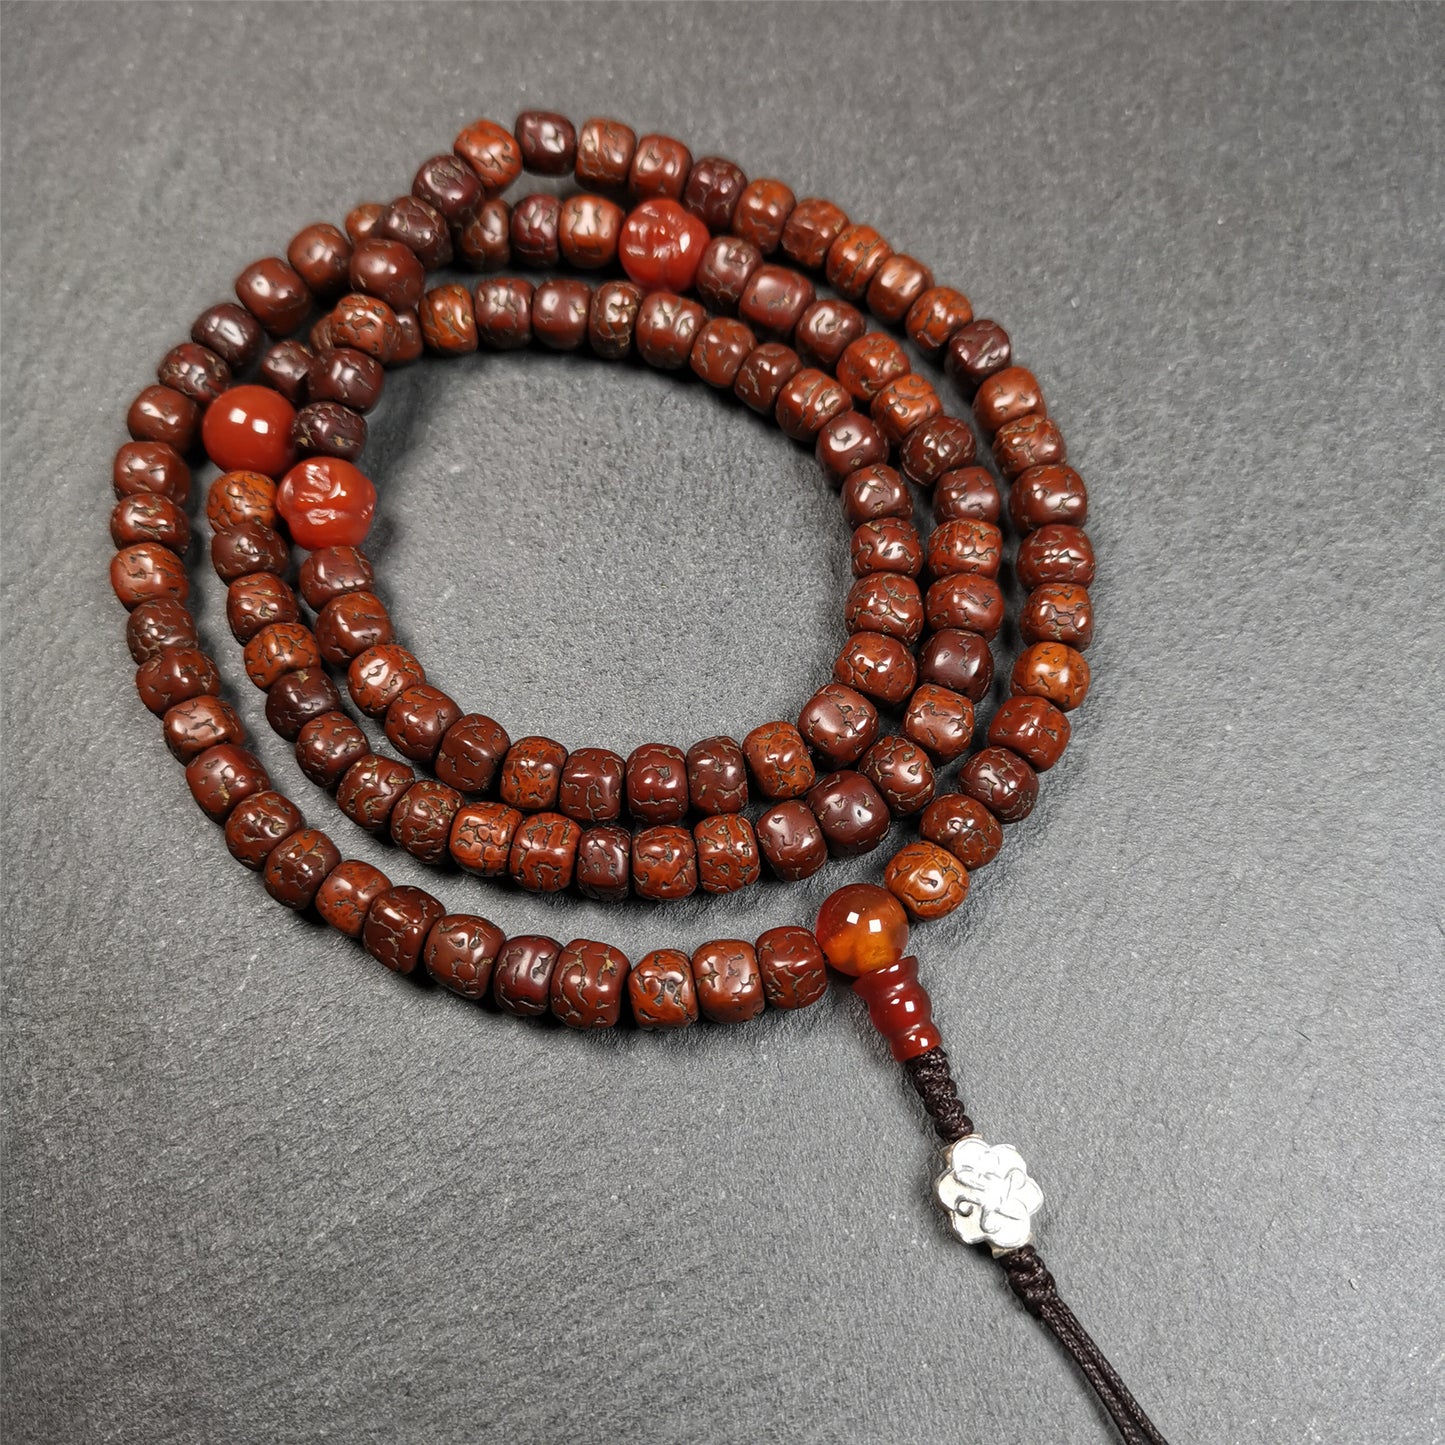 This old rudraksha mala was handmade from tibetan crafts man in Baiyu County. It's composed of 108 pcs 7mm rudraksha beads,with agate beads,agate guru bead,and silver lucky knot pendant. Great Mala For Meditation and Yoga Practitioners.